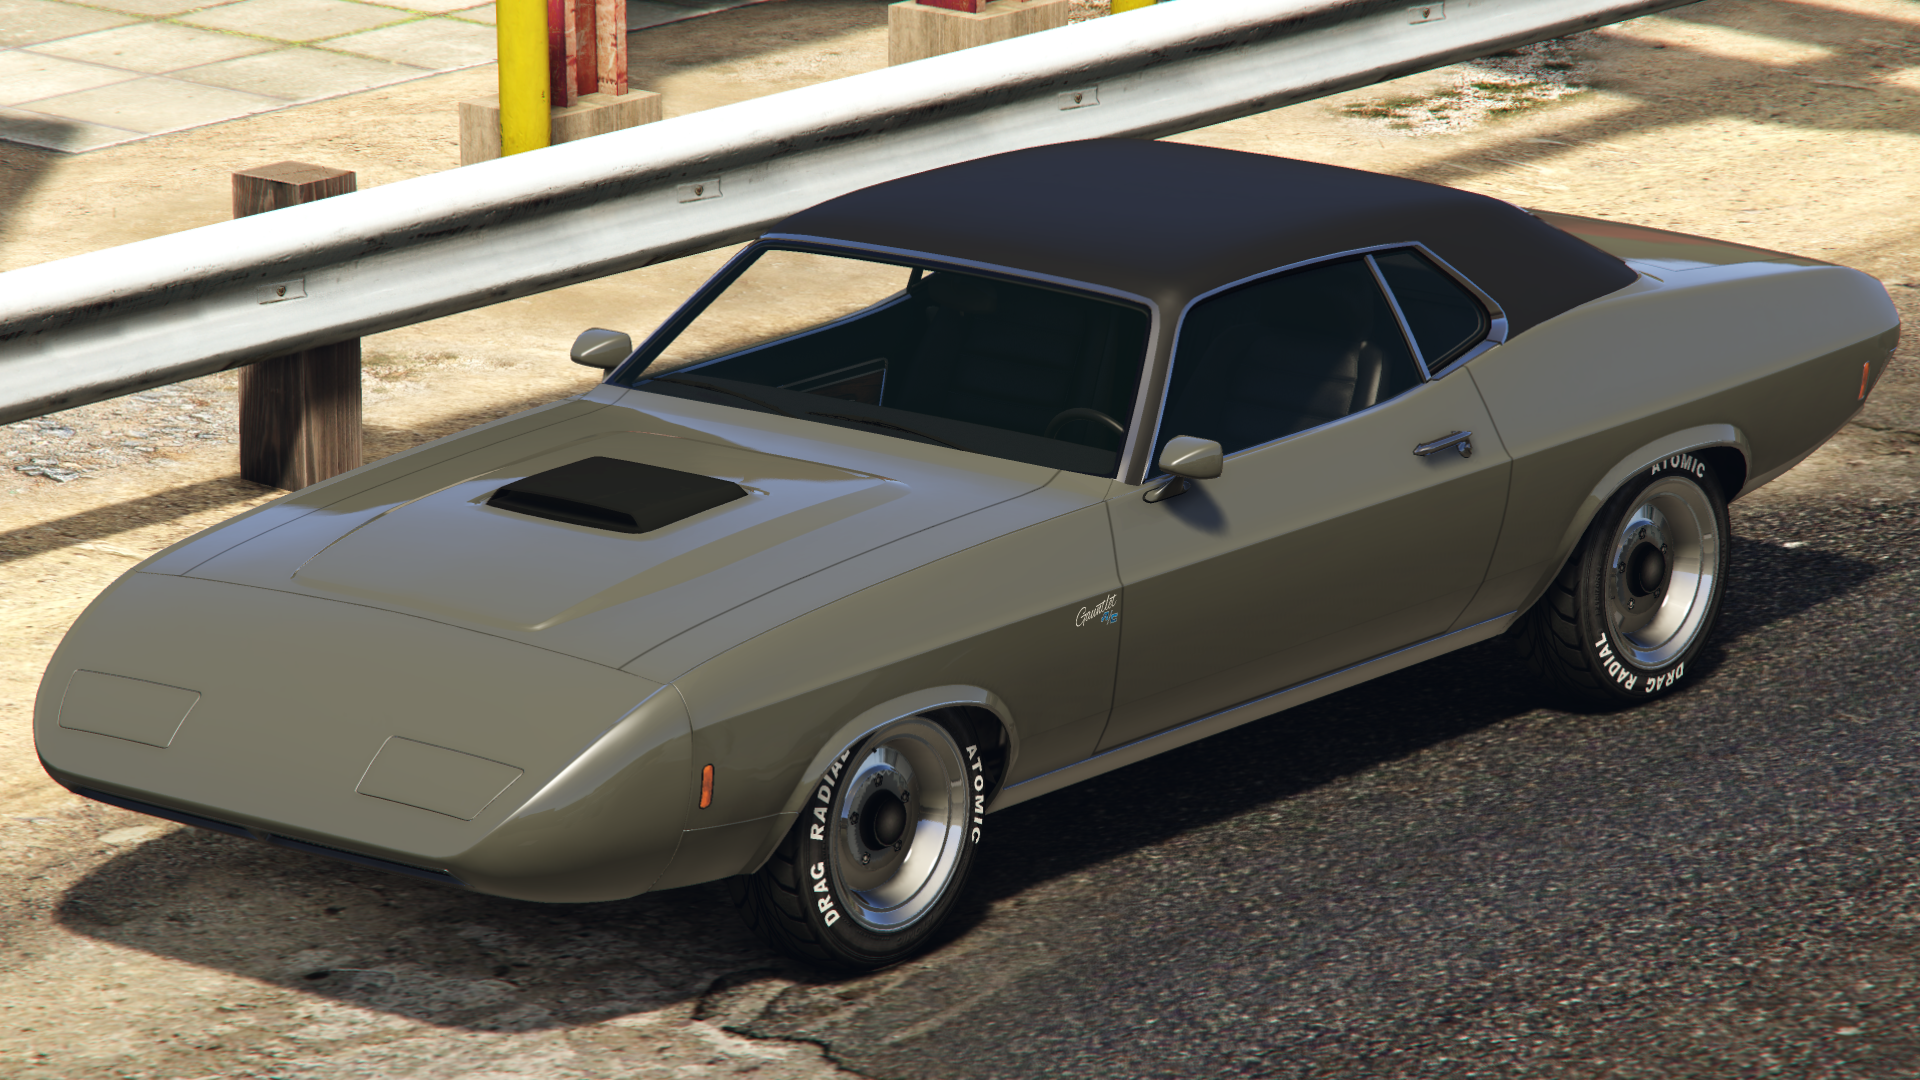 https://static.wikia.nocookie.net/gtawiki/images/f/f8/GauntletClassicCustom-GTAO-front.png/revision/latest?cb=20200812100108